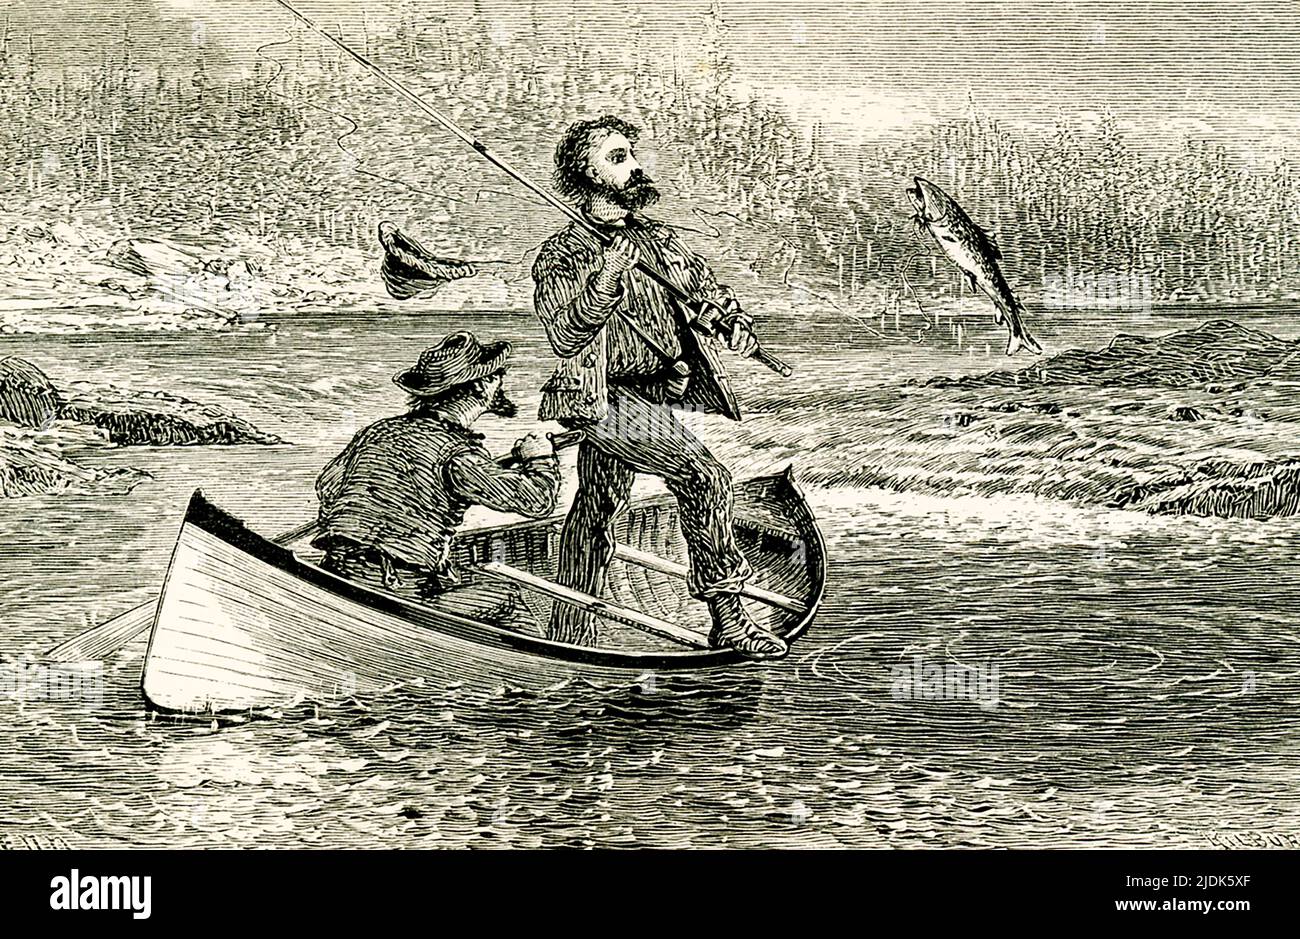 The 1869 caption reads: ' When, high in mid air, he shook himself, the crystal drops were flung into my very face.' The scene shows two men in a boat fishing in the Adirondacks. Stock Photo